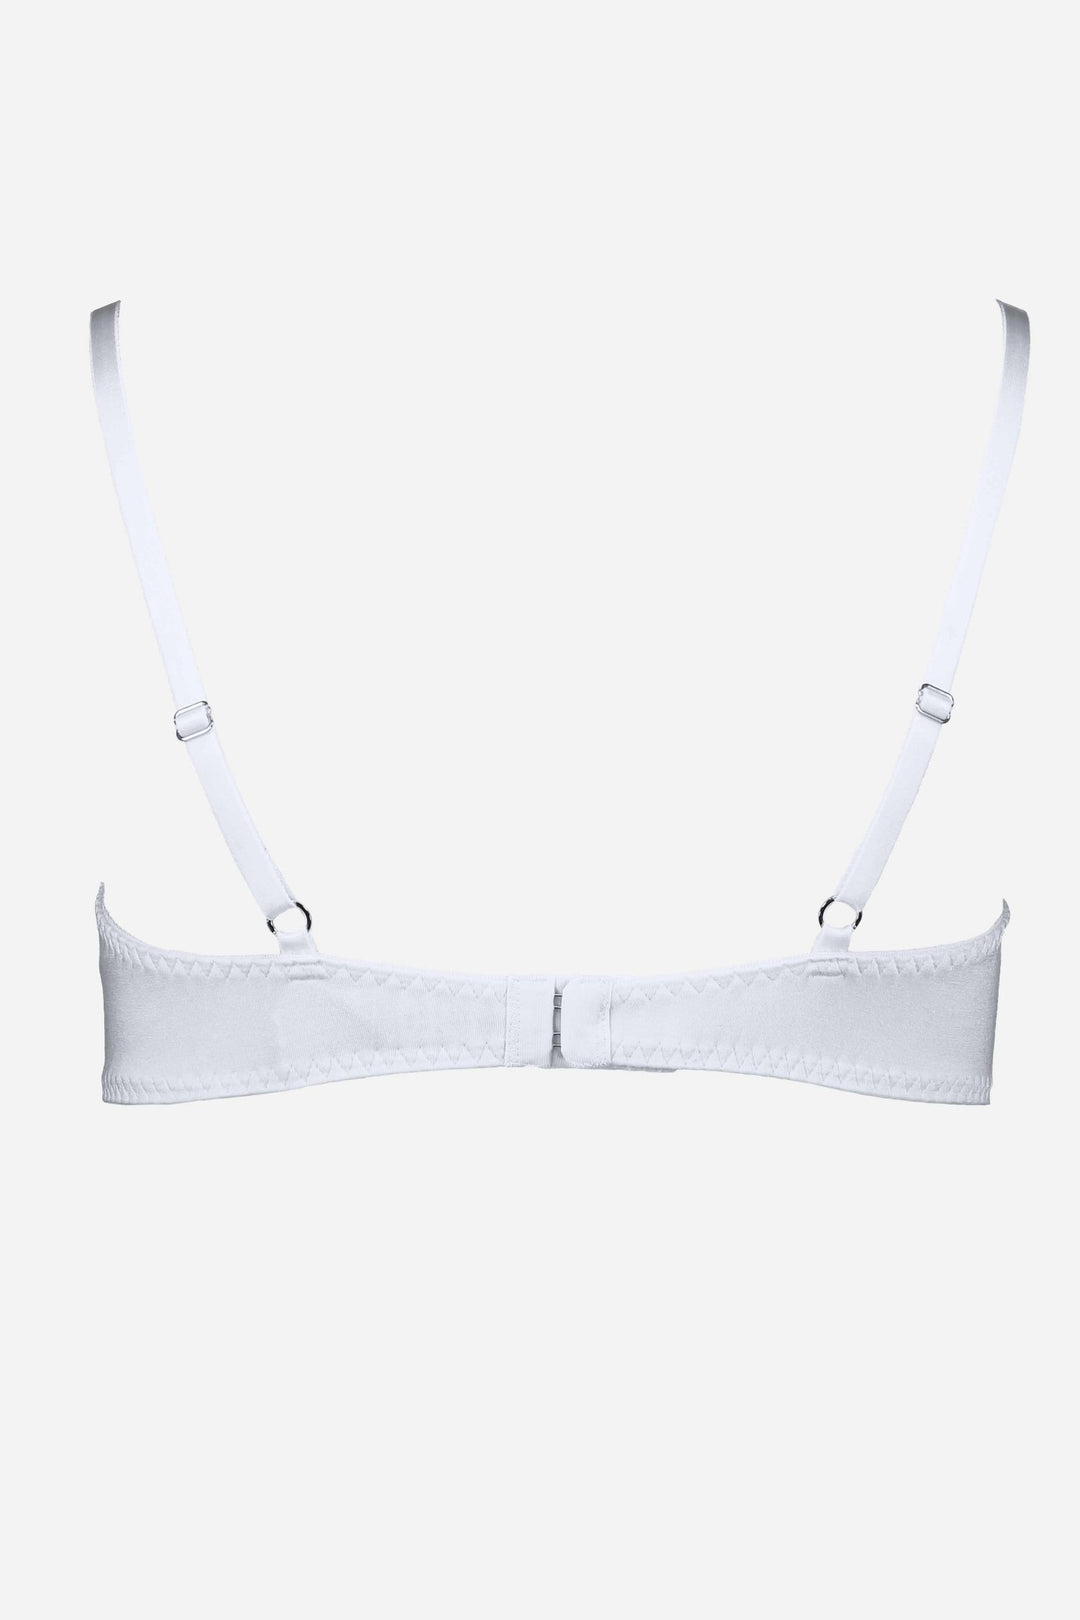 Videris Lingerie Maggie soft cup bra in embroideried white TENCEL™ features adjustable back straps and hook and eyes closure